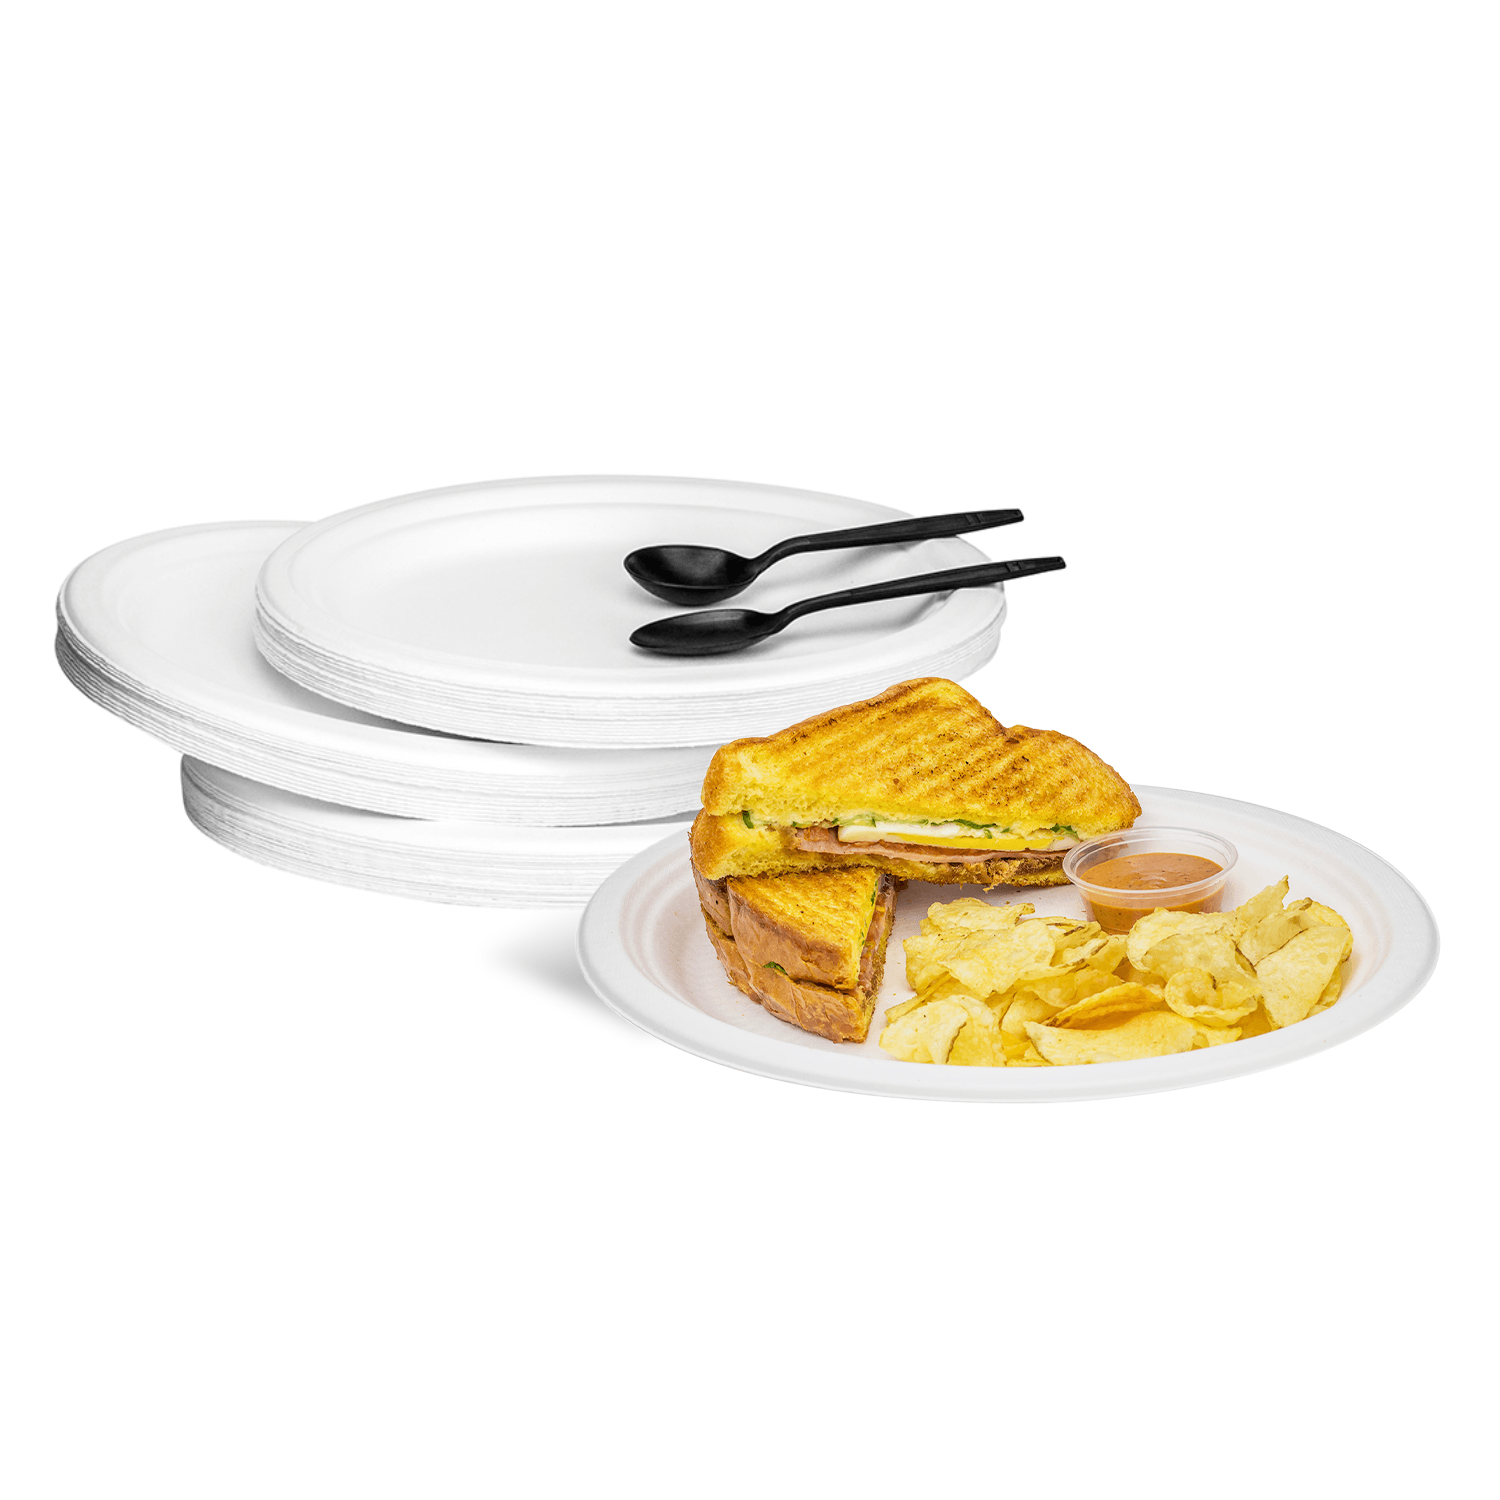 White Karat Earth 10''x8'' PFAS Free Compostable Bagasse Oval Plates with sandwich and chips